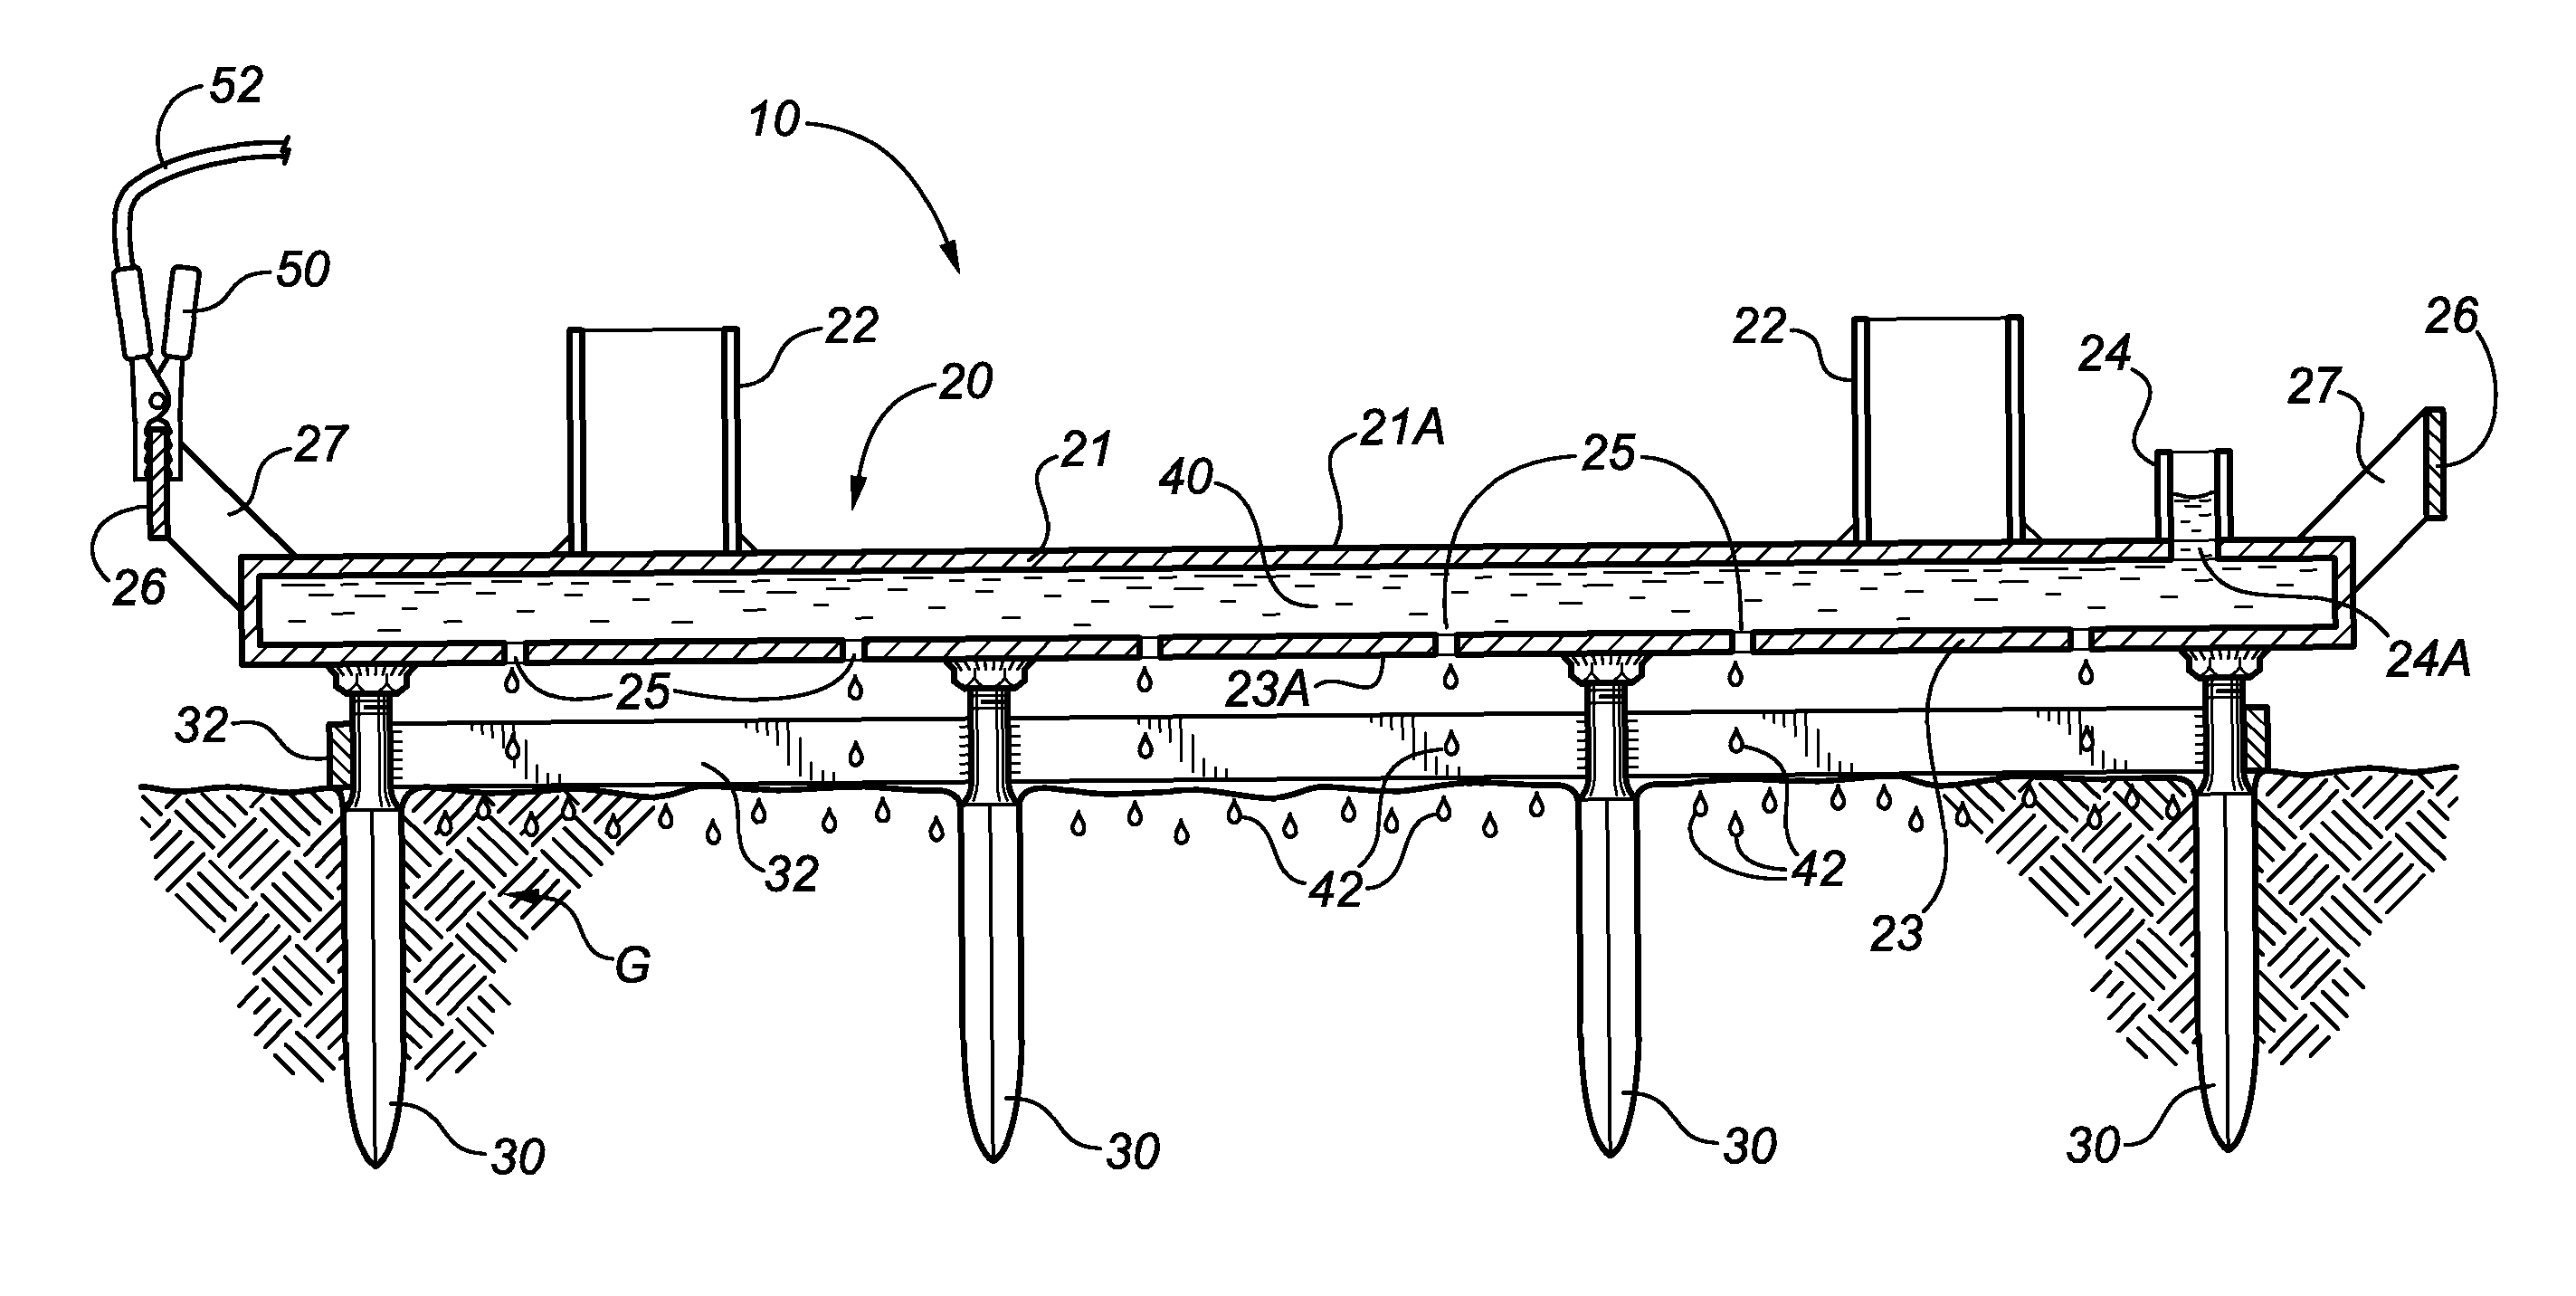 Electrical ground fault protection device